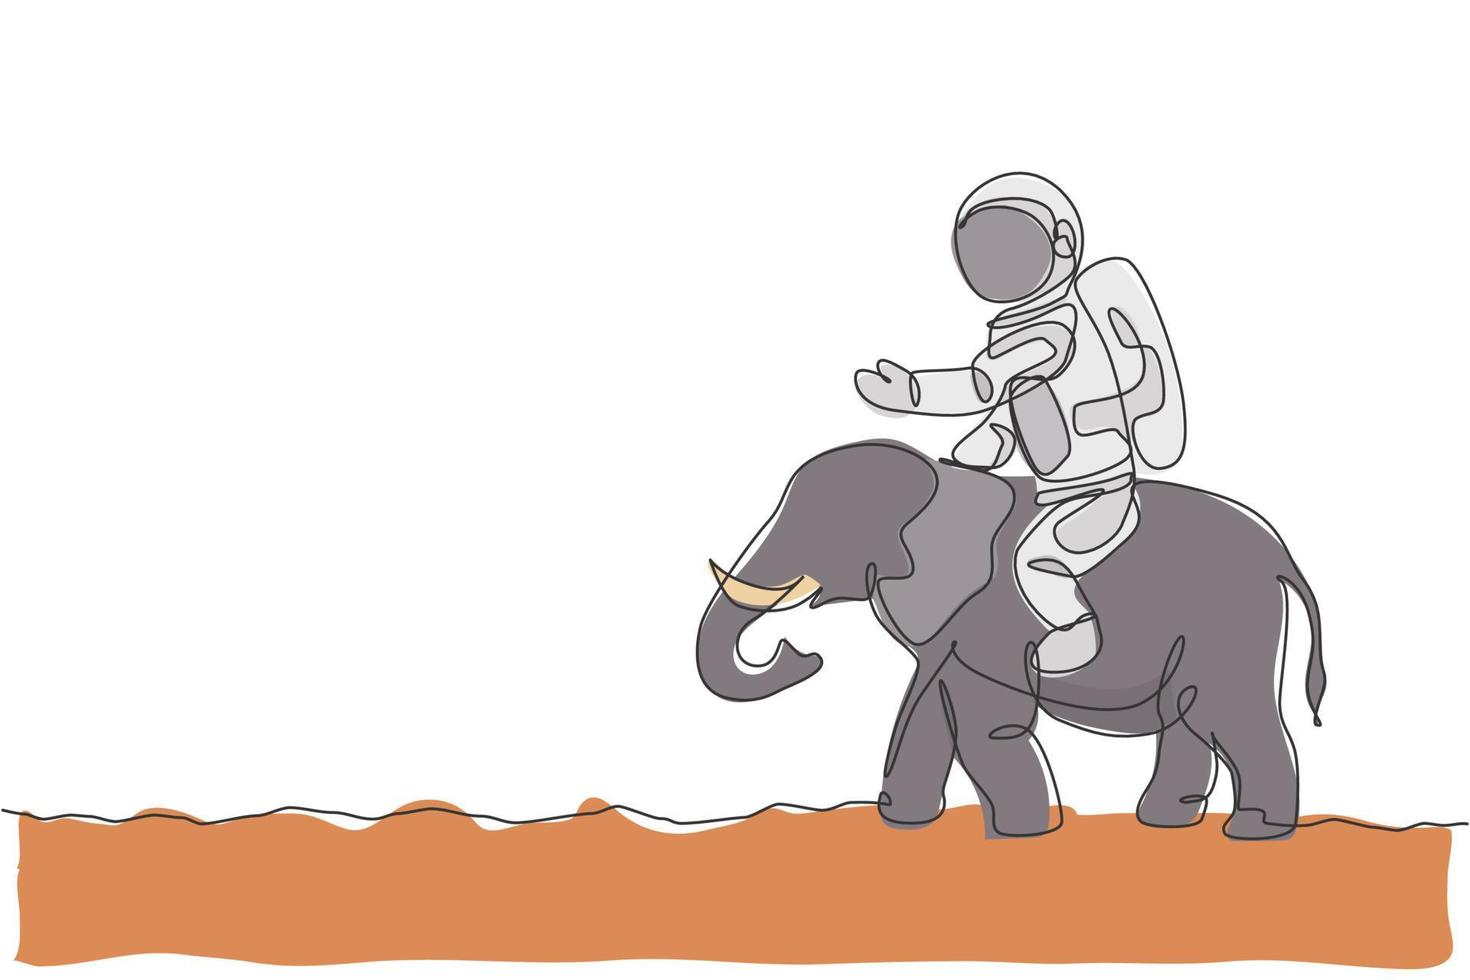 One continuous line drawing of cosmonaut with spacesuit riding Aisan elephant, wild animal in moon surface. Astronaut zoo safari journey concept. Trendy single line draw design vector illustration